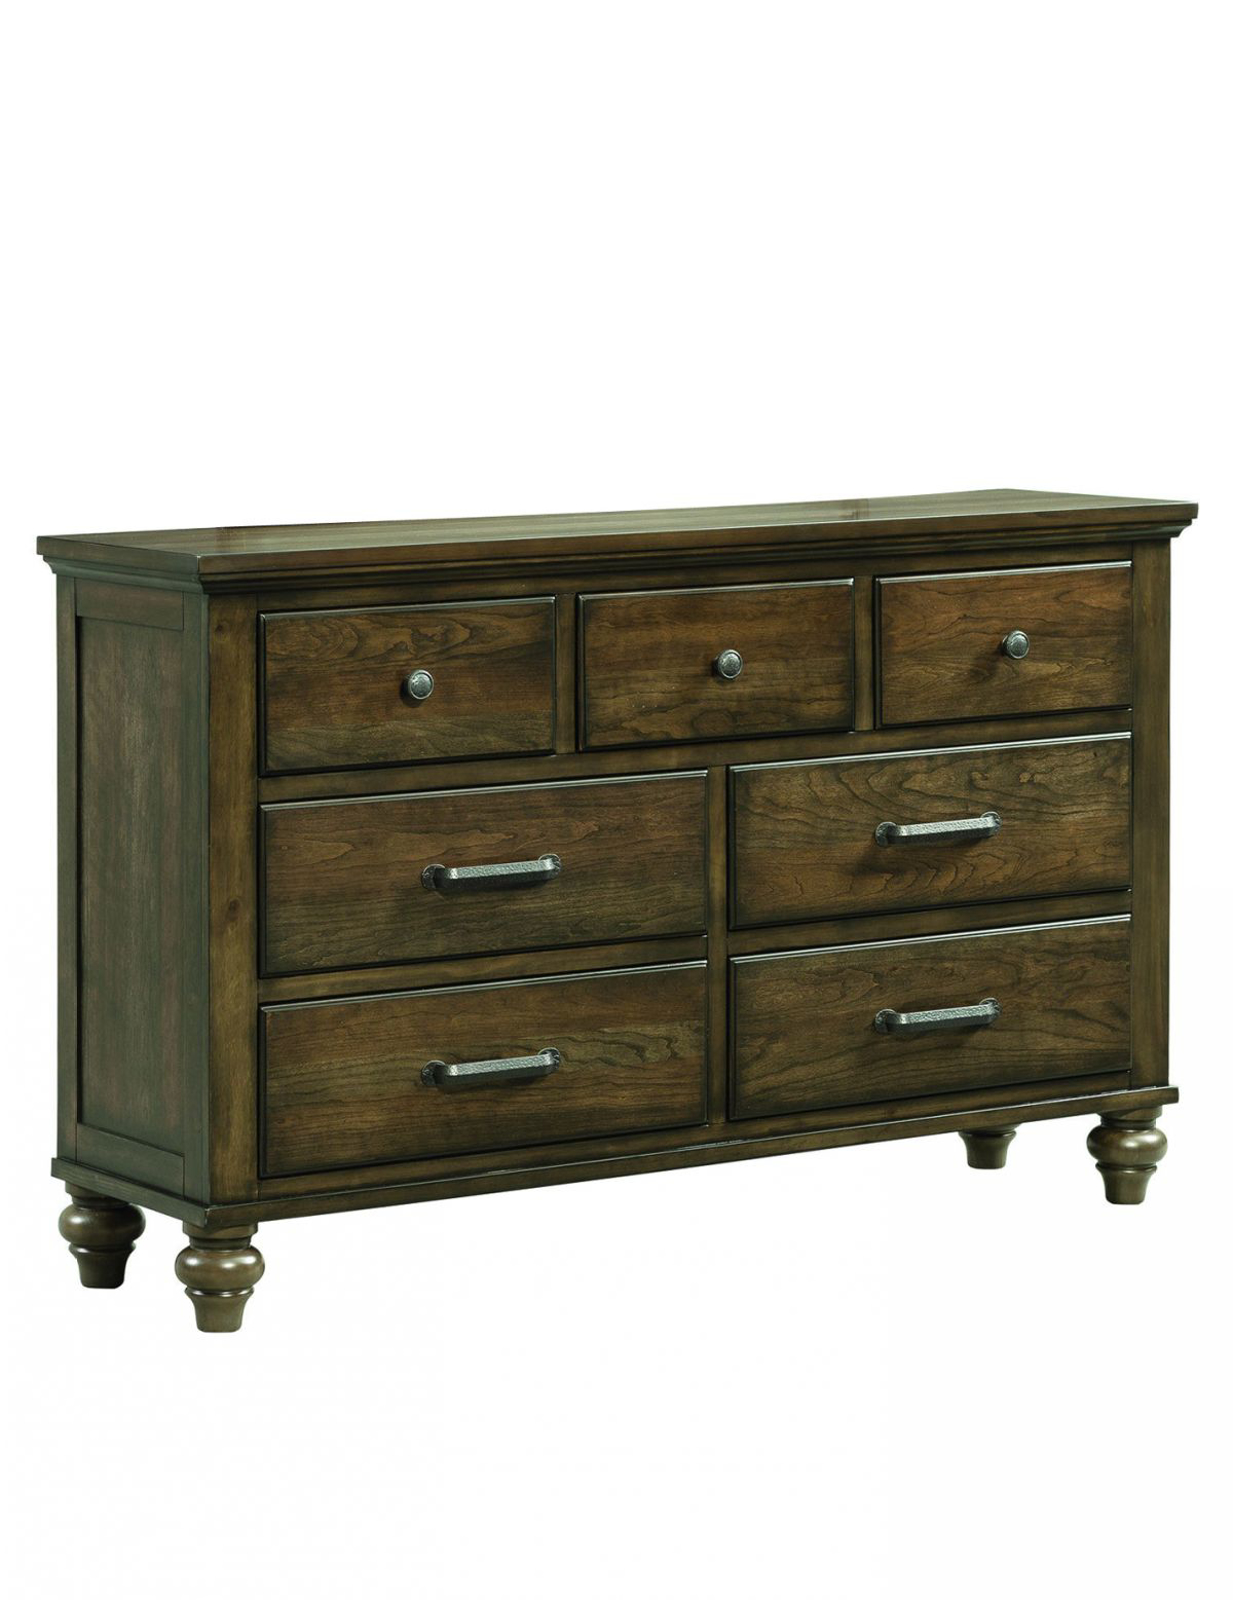 Picture of Chatham Dresser